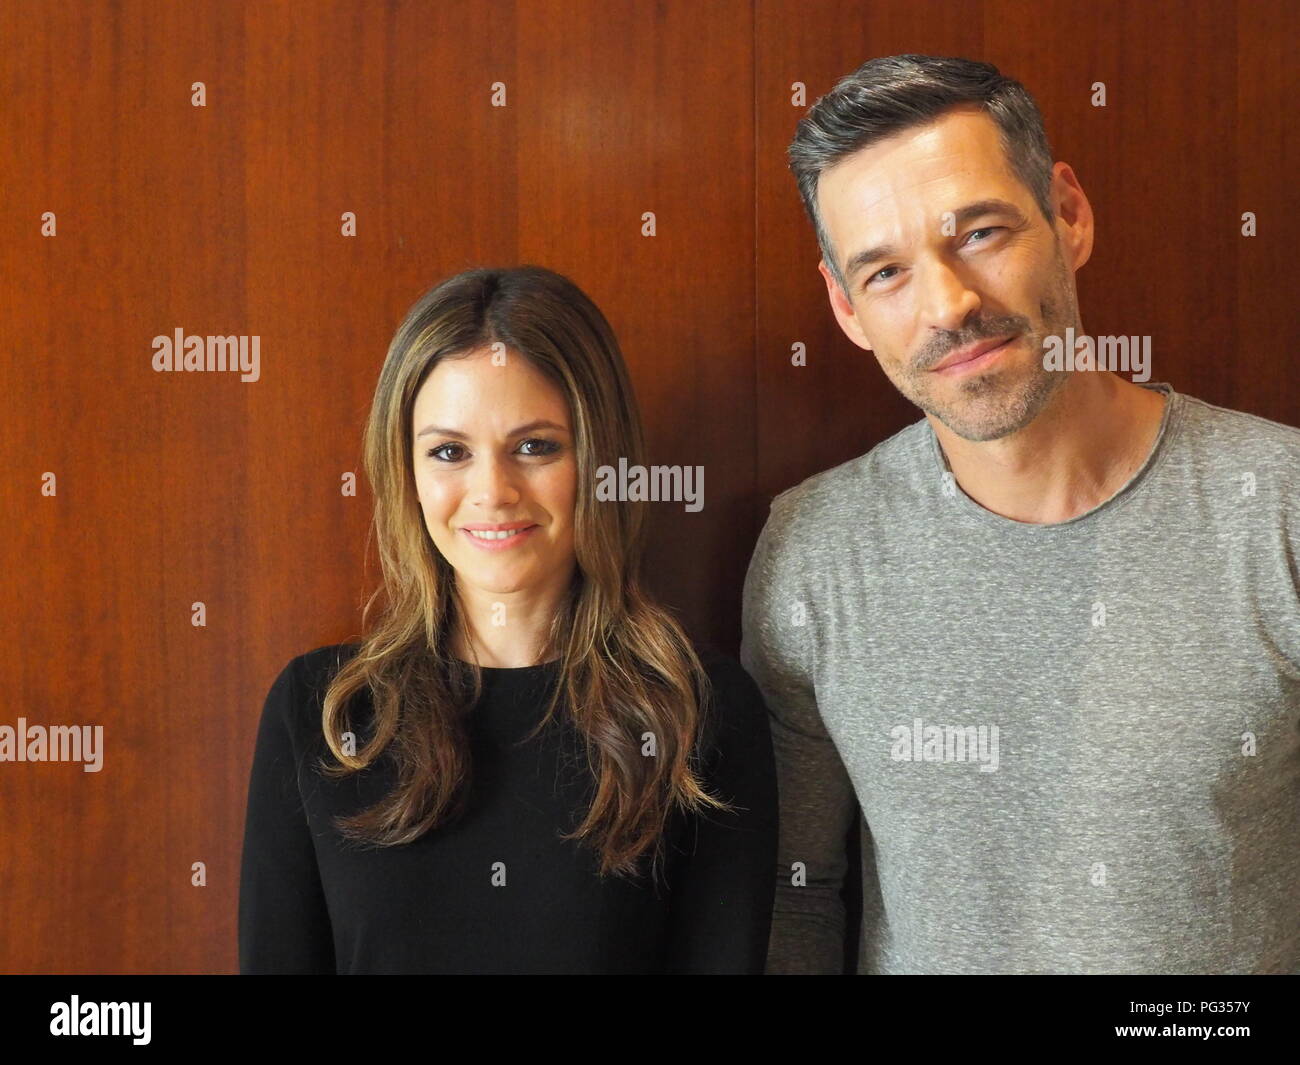 Paris, France. 23rd Aug, 2018. The American actors Rachel Bilson and Eddie Cibrian at a photo shoot for the presentation of the Vox series 'Take Two'. (on dpa 'US actress Rachel Bilson would like to come to Germany' from 23.08.2018) Credit: Christian Böhmer/dpa/Alamy Live News Stock Photo